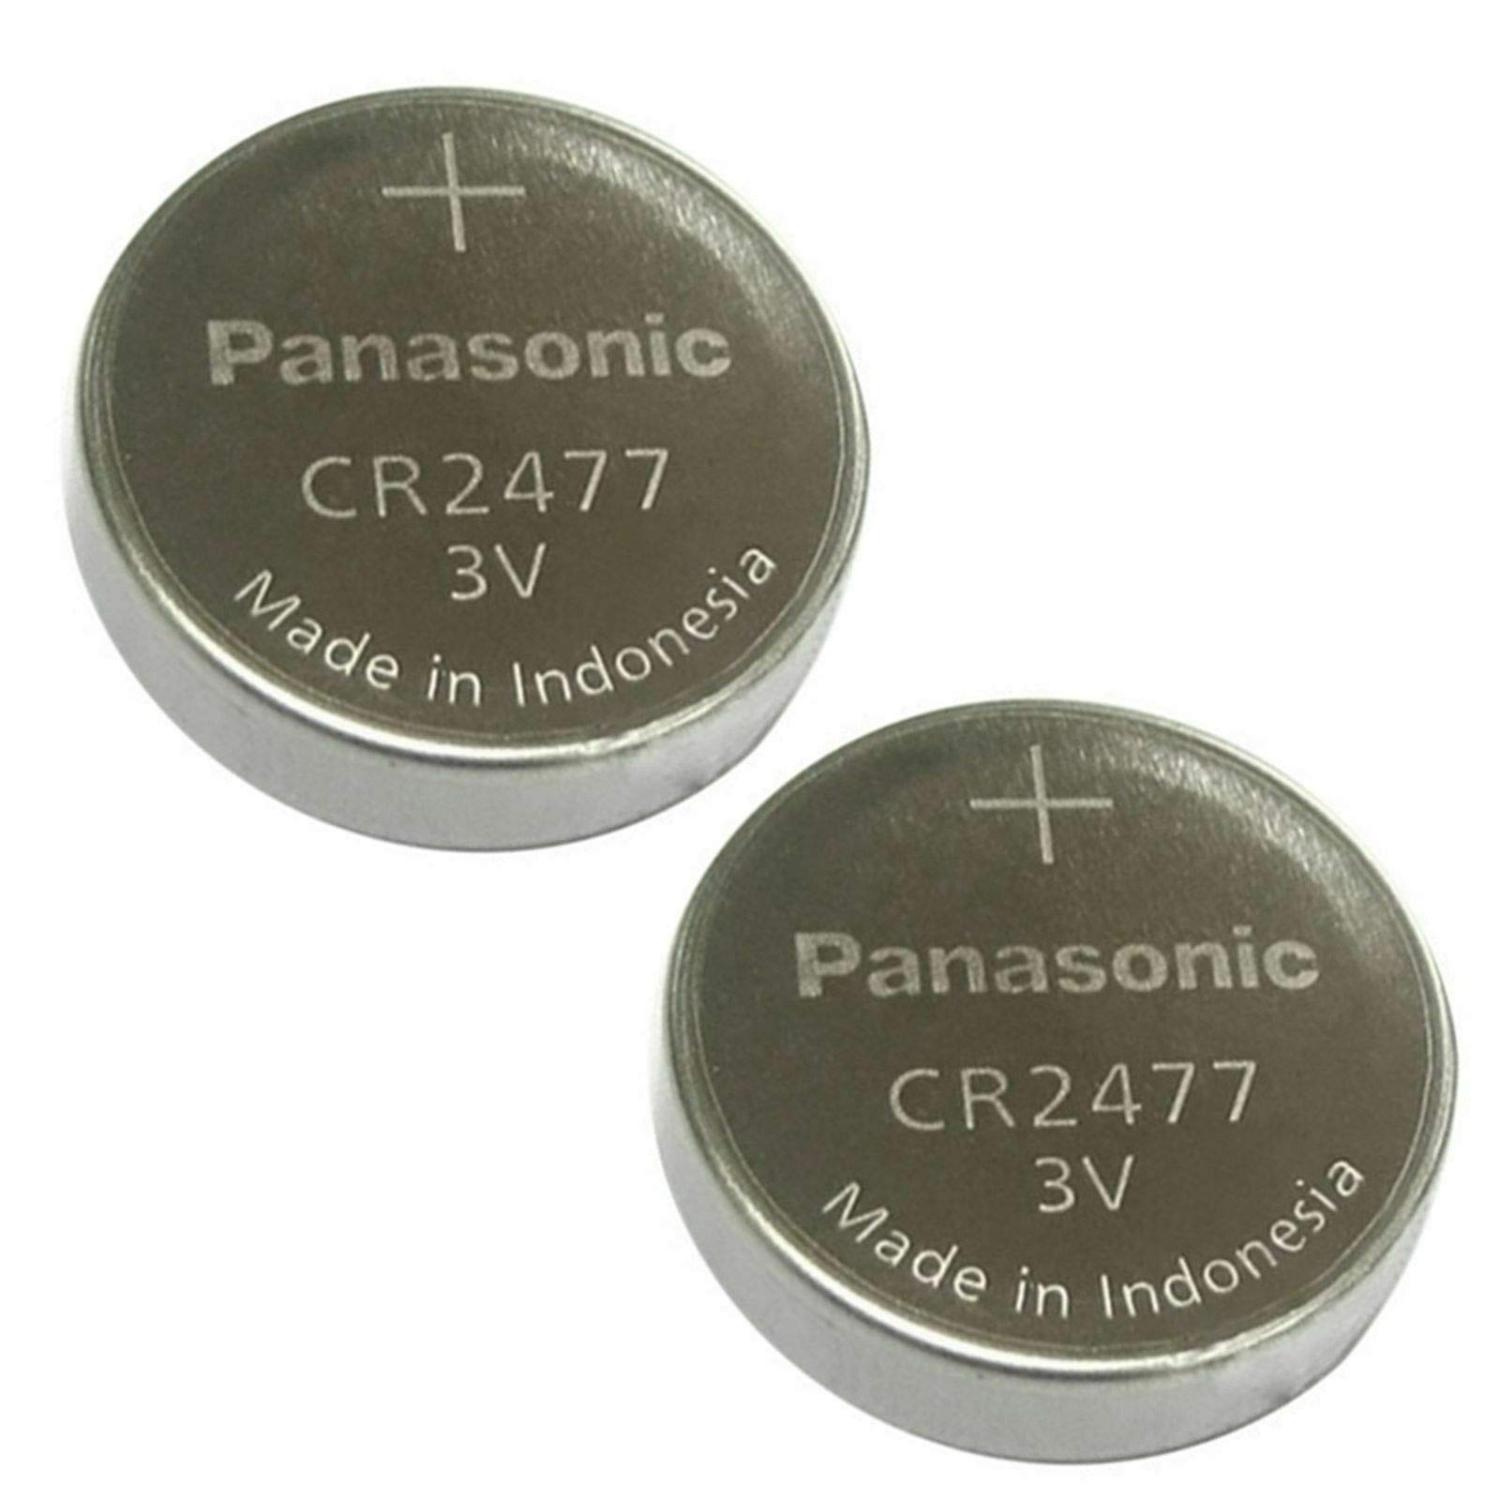 Panasonic CR2477 3V Lithium Cell Battery (Pack of 2) 2 Count (Pack of 1)